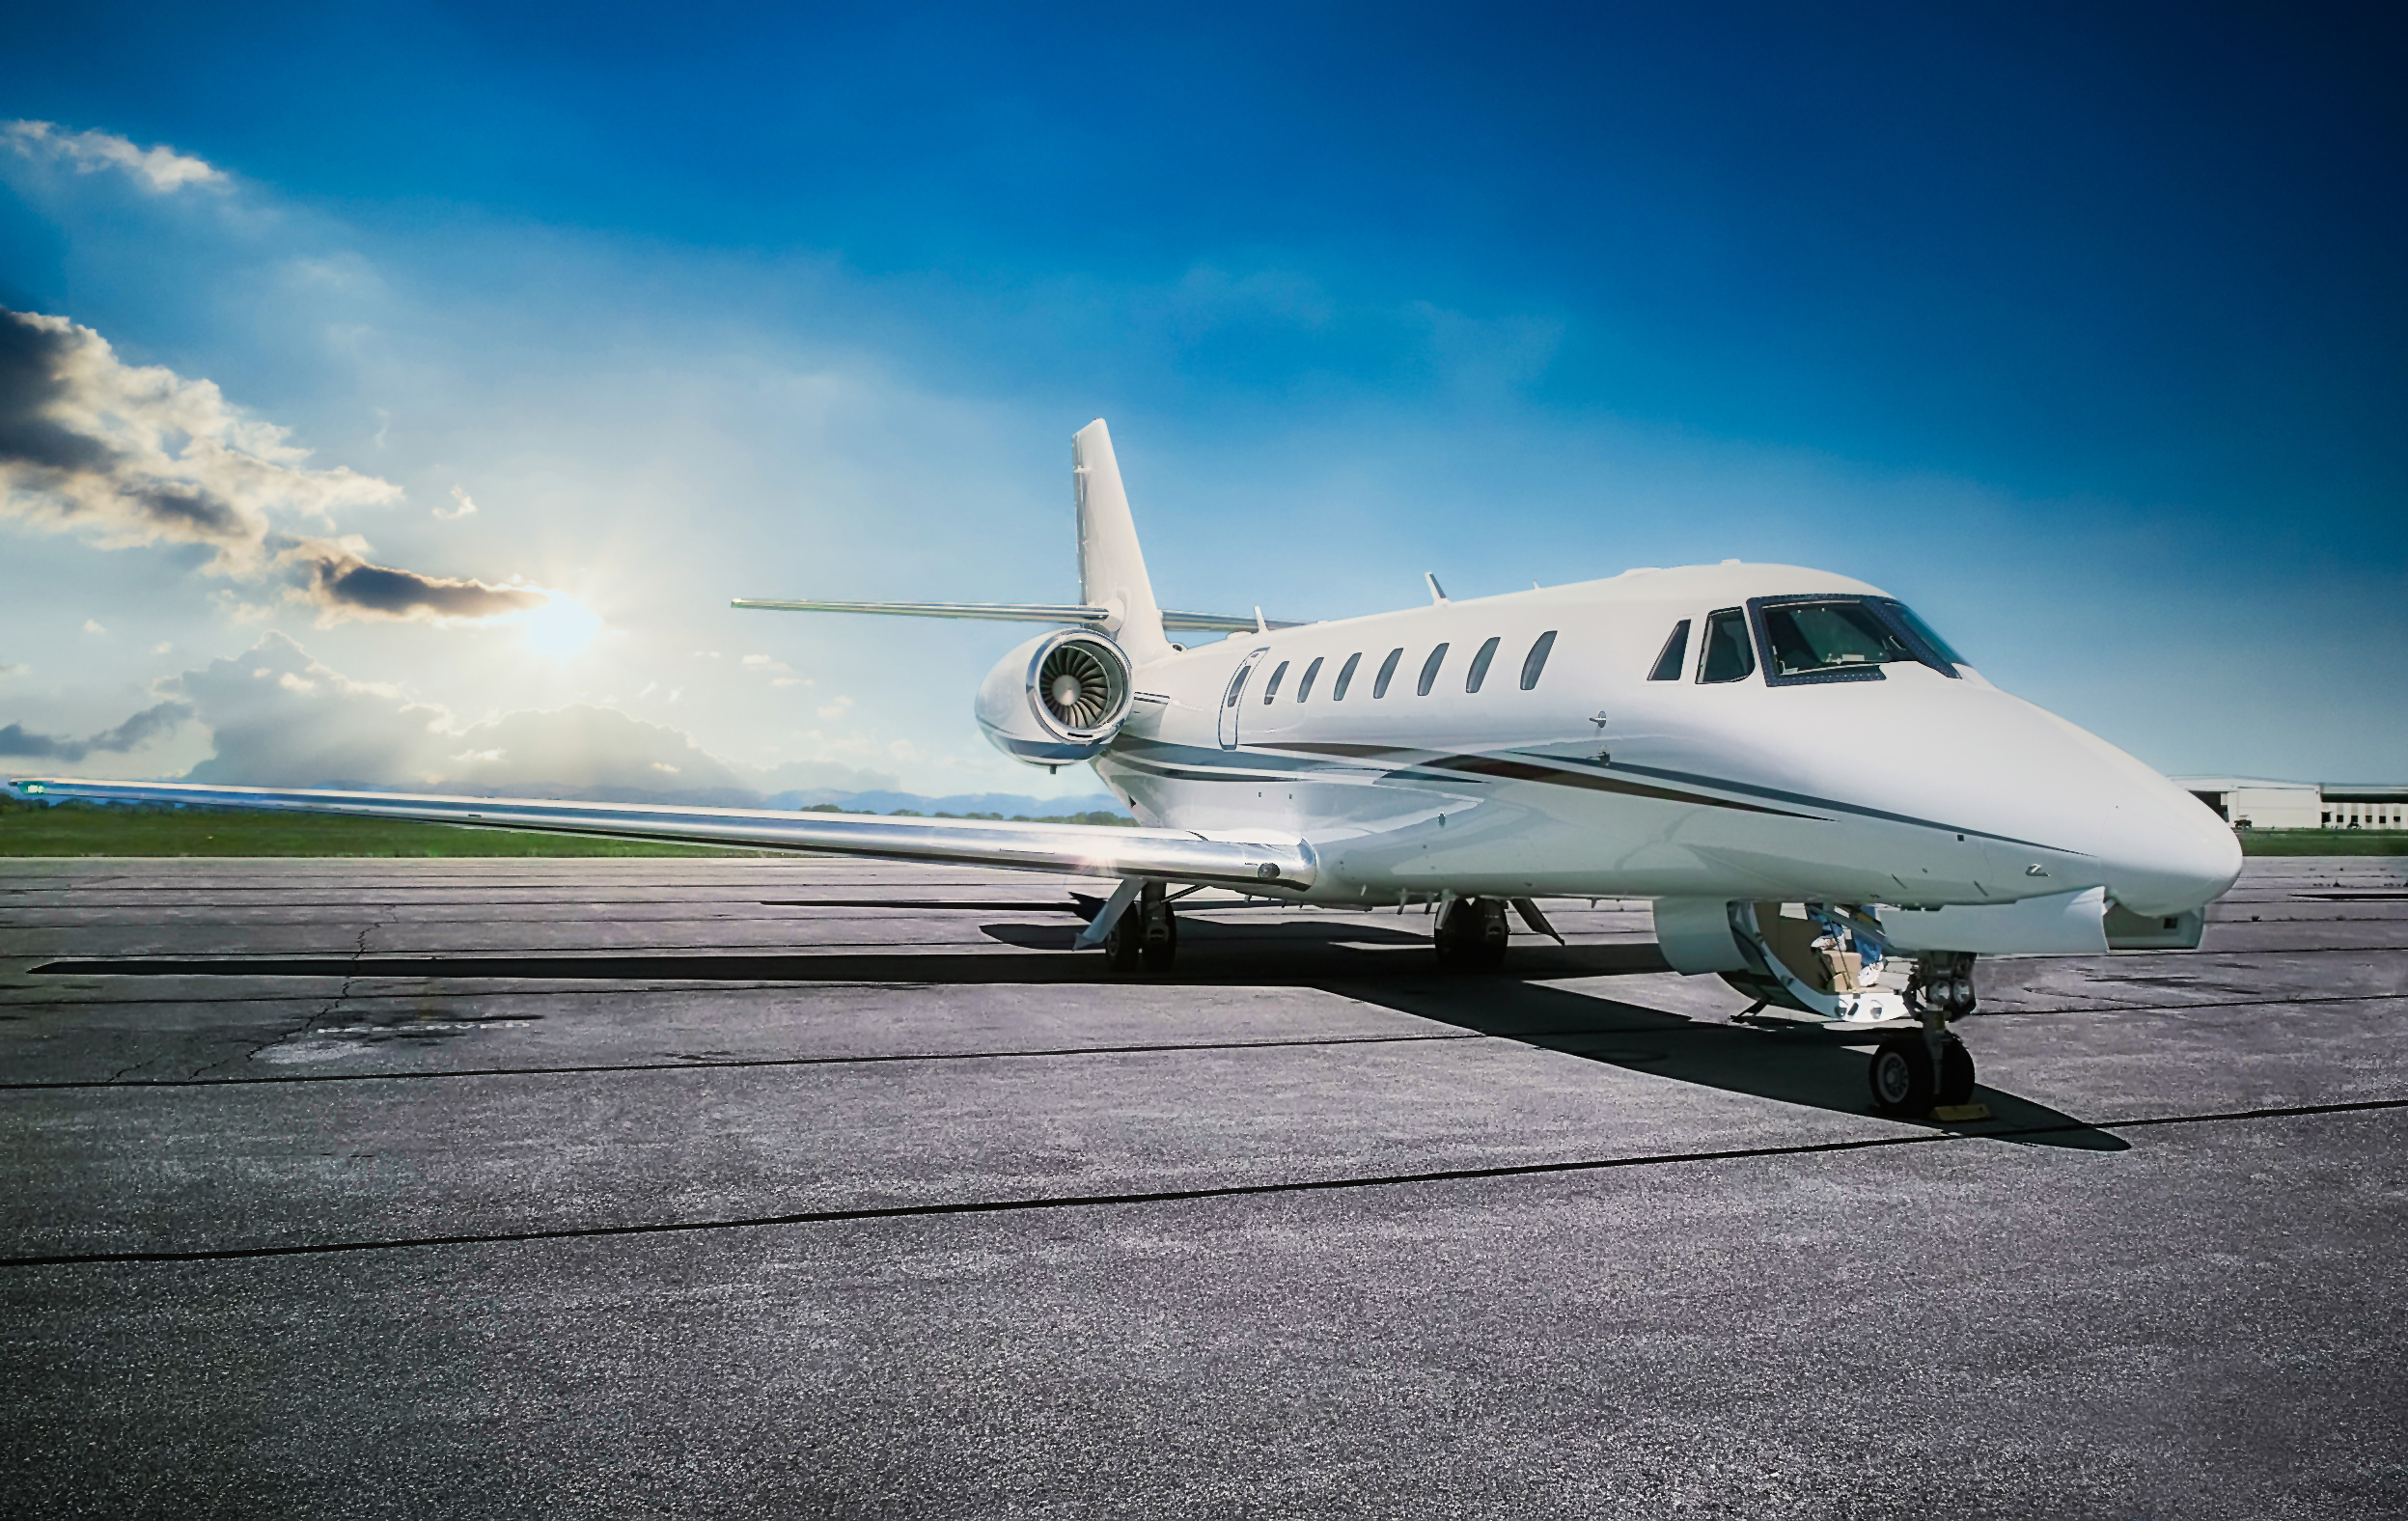 City+Ventures and Mente Group Partner to Create Aquila Aviation Ventures Investment Group